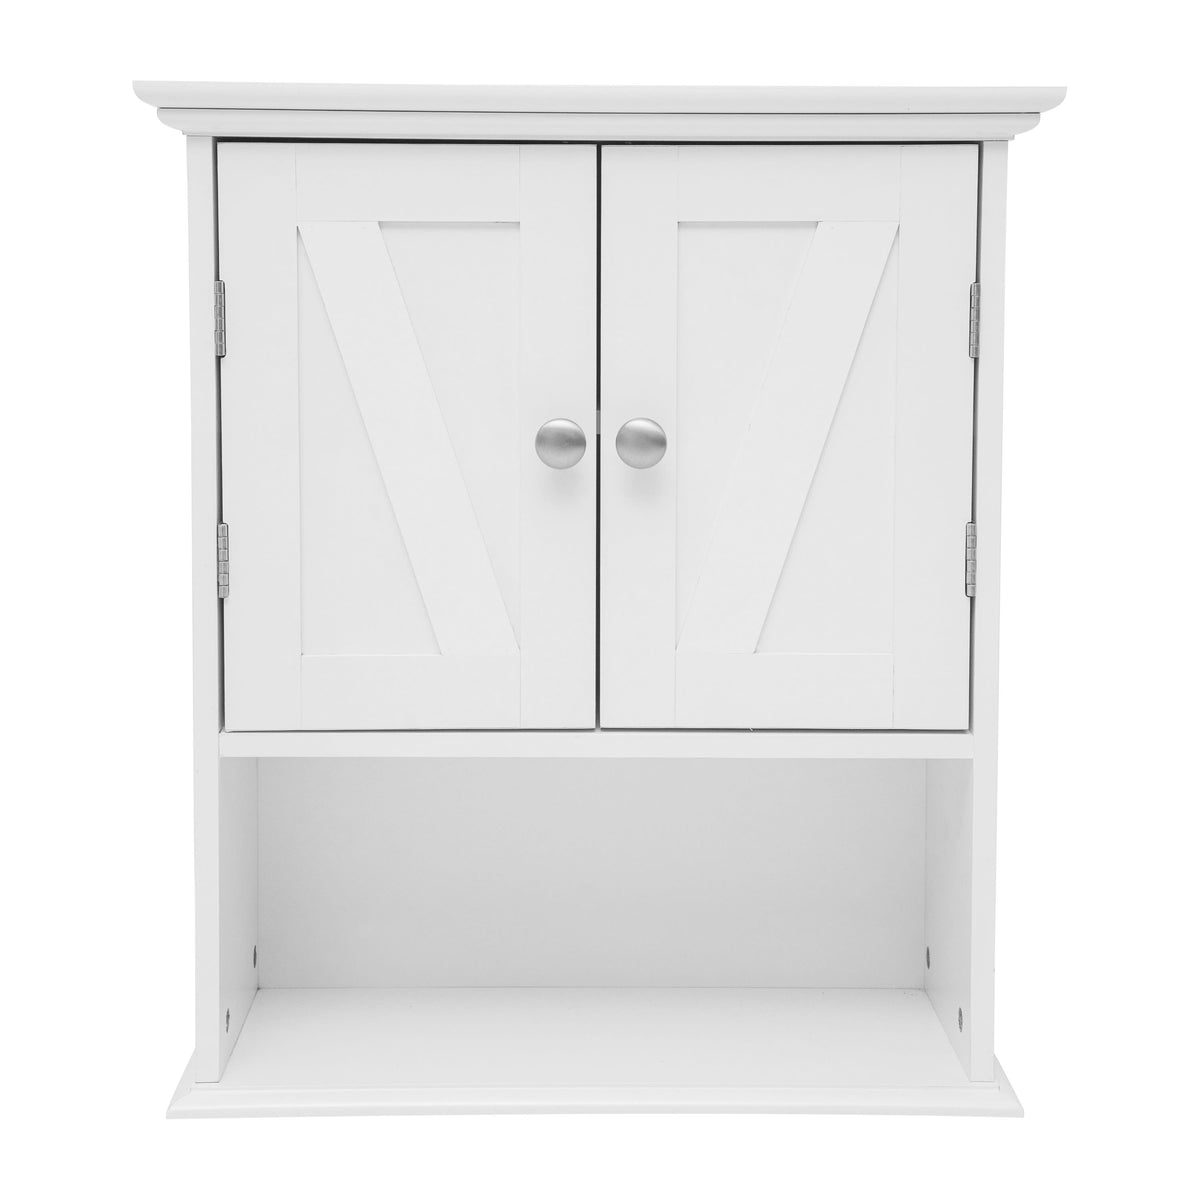 White |#| Farmhouse Wall Mount Medicine Cabinet with Adjustable Shelf and Dual Doors-White